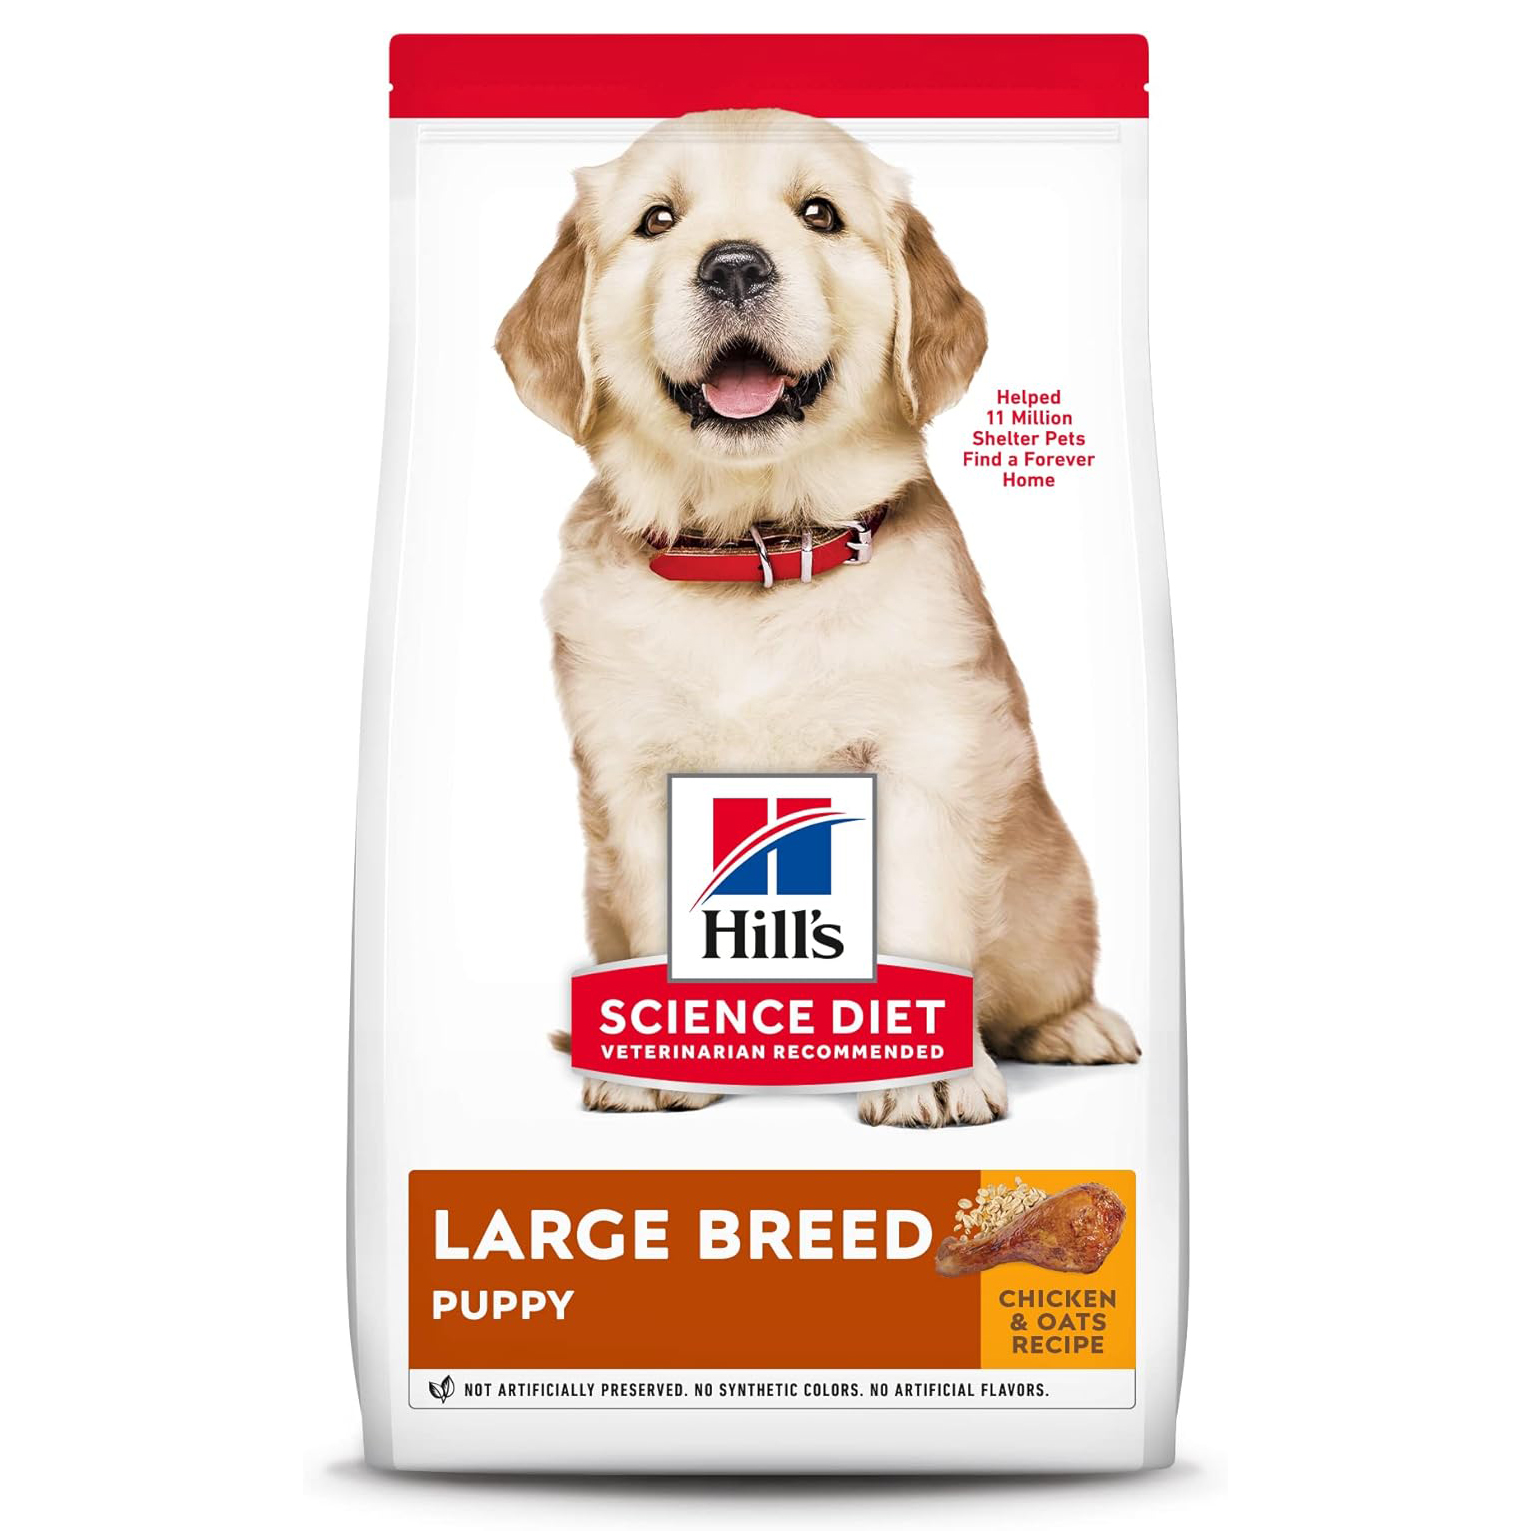 Hill’s Science Diet Puppy Large Breed Dog